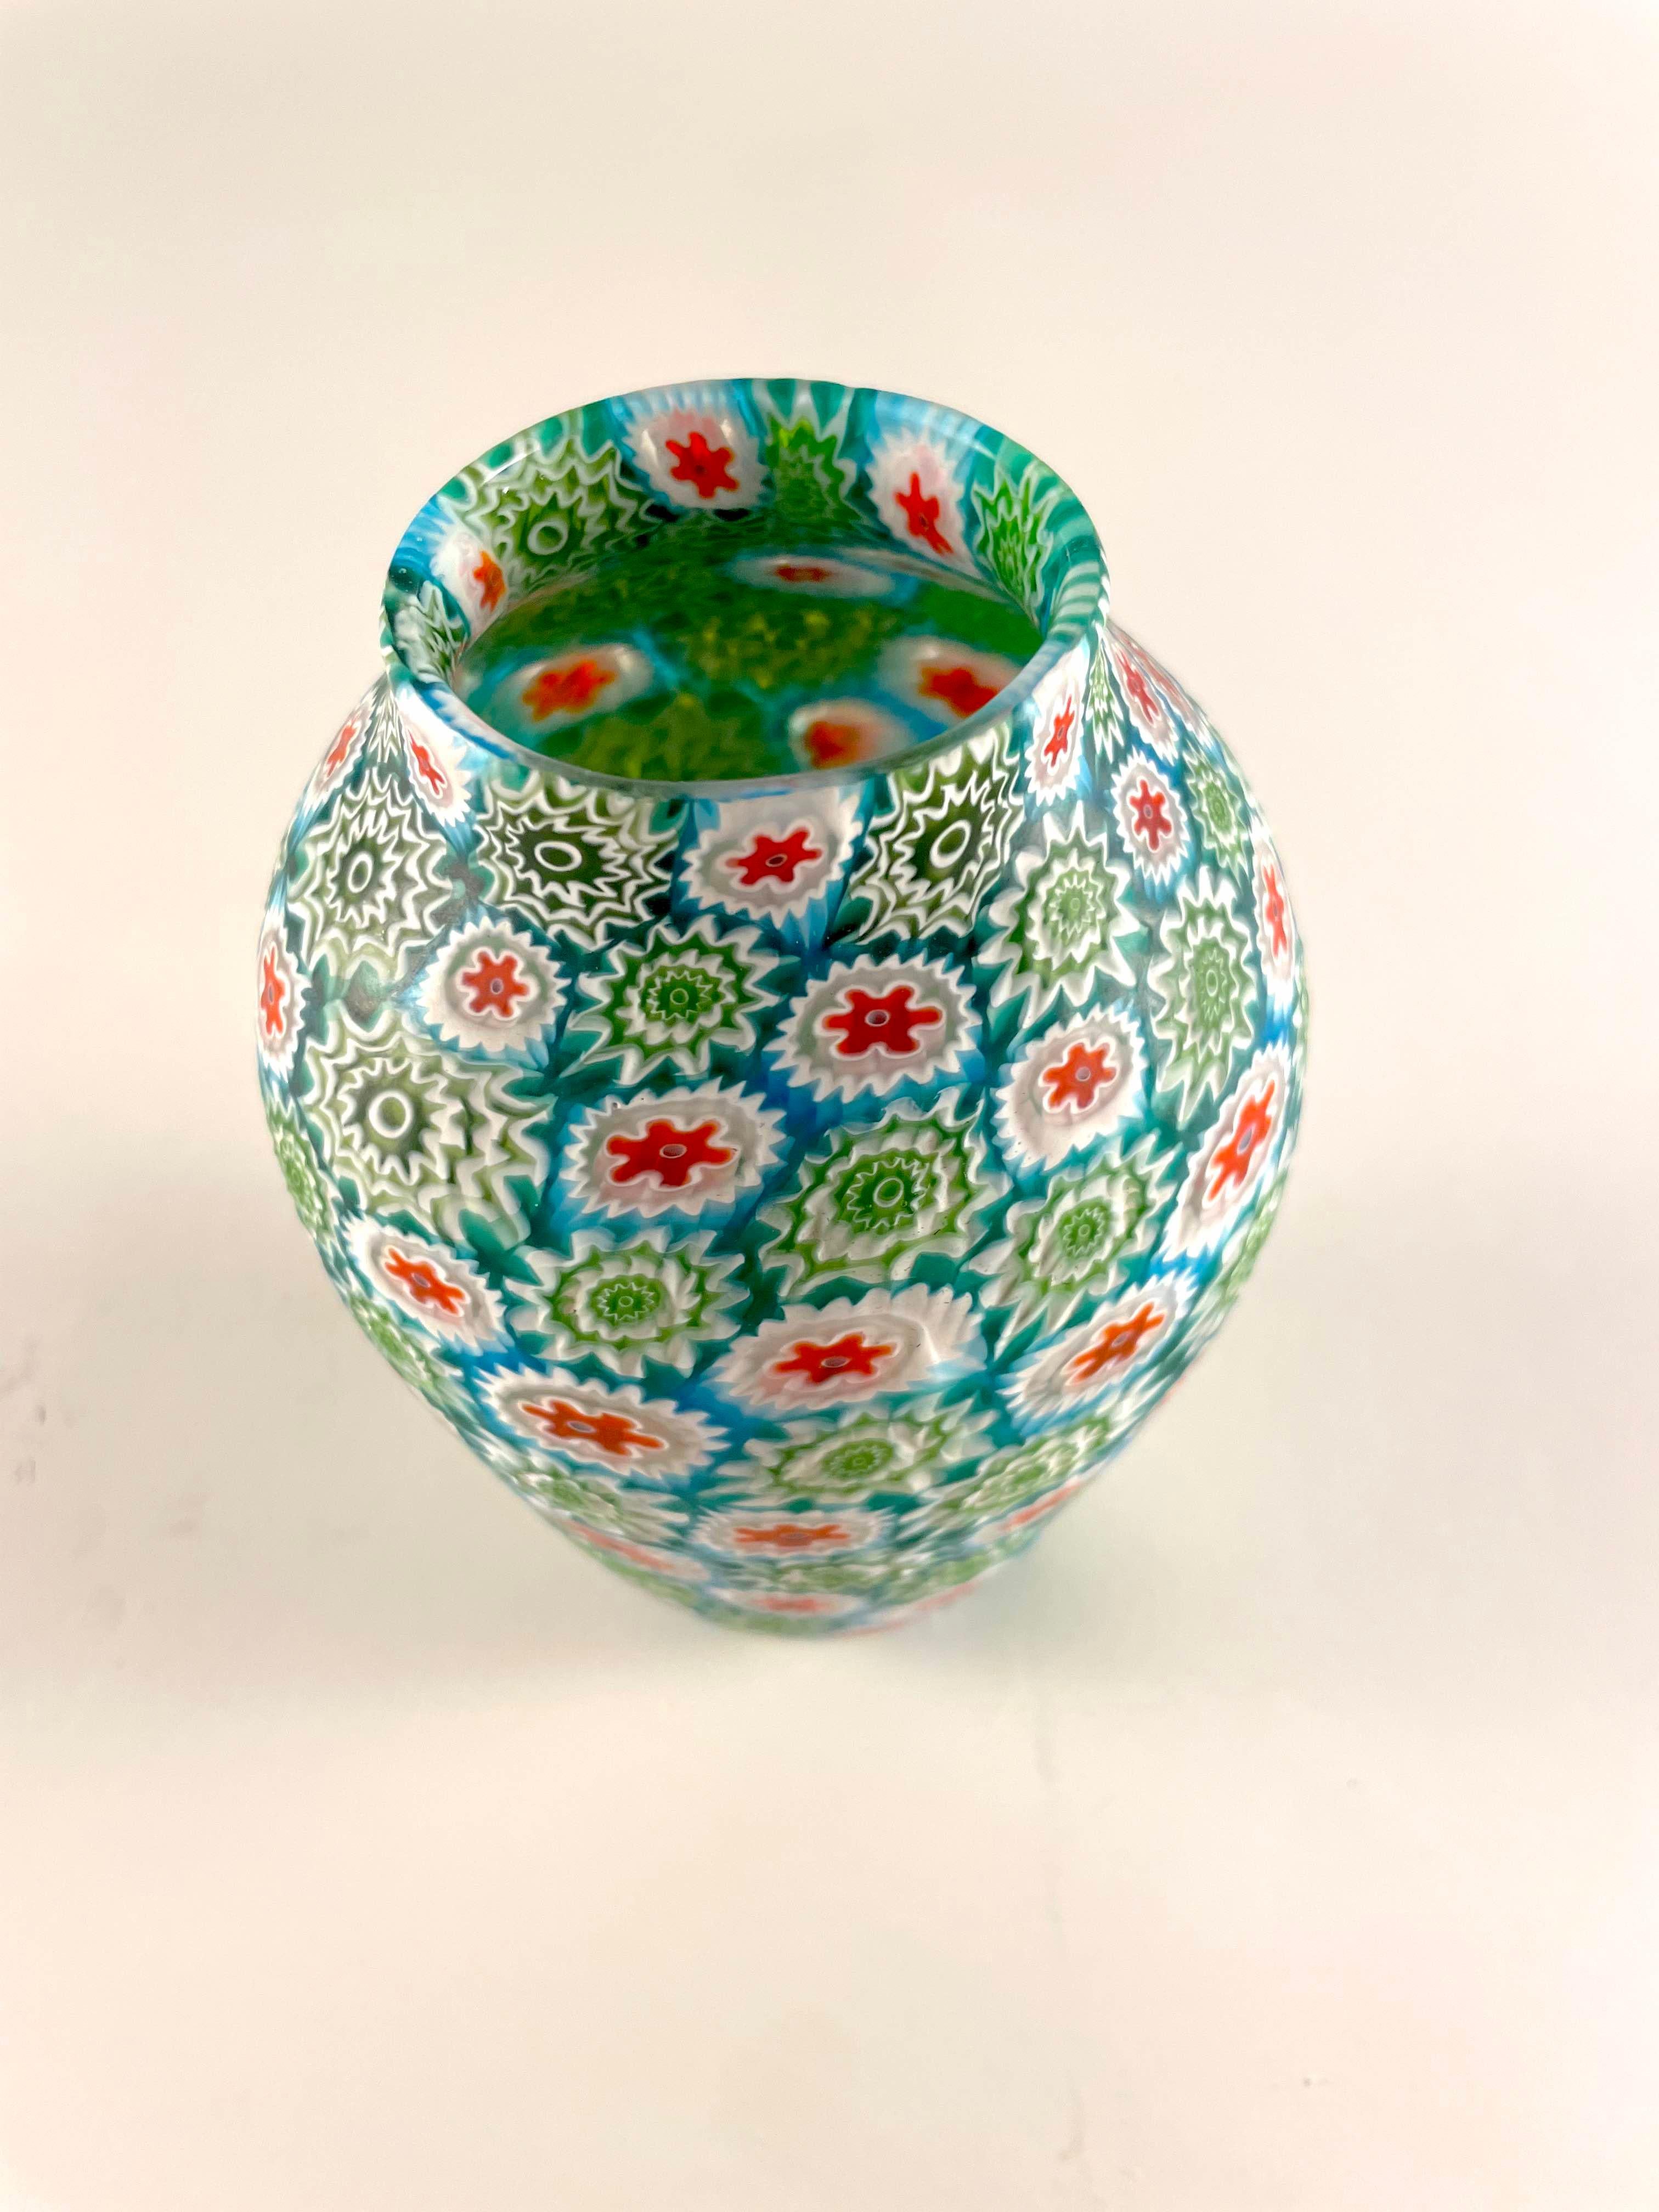 Millefiori Murrina vase by Fratelli Toso. This classic design hails from the '50s and showcases the true craftsmanship that made Fratelli Toso famous. Each piece is meticulously crafted using the murrina technique, making it a collectible vintage